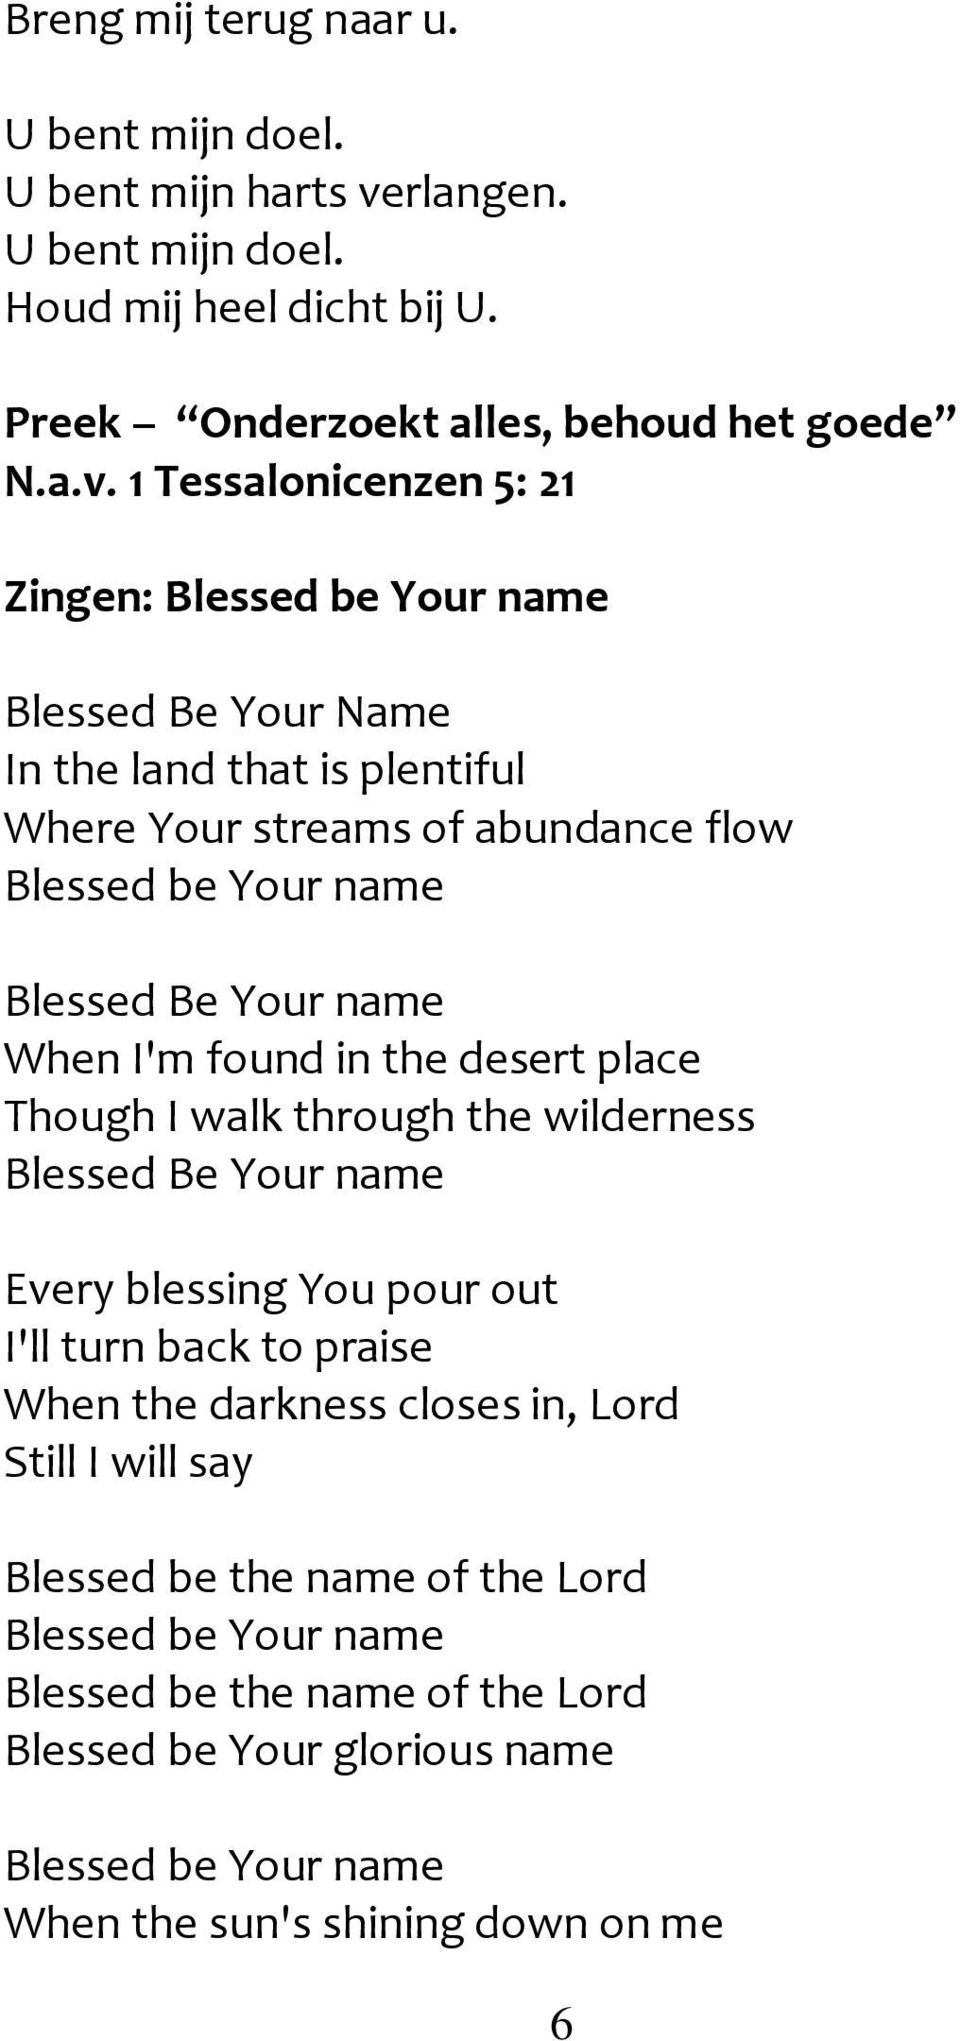 1 Tessalonicenzen 5: 21 Zingen: Blessed Be Your Name In the land that is plentiful Where Your streams of abundance flow Blessed Be Your name When I'm found